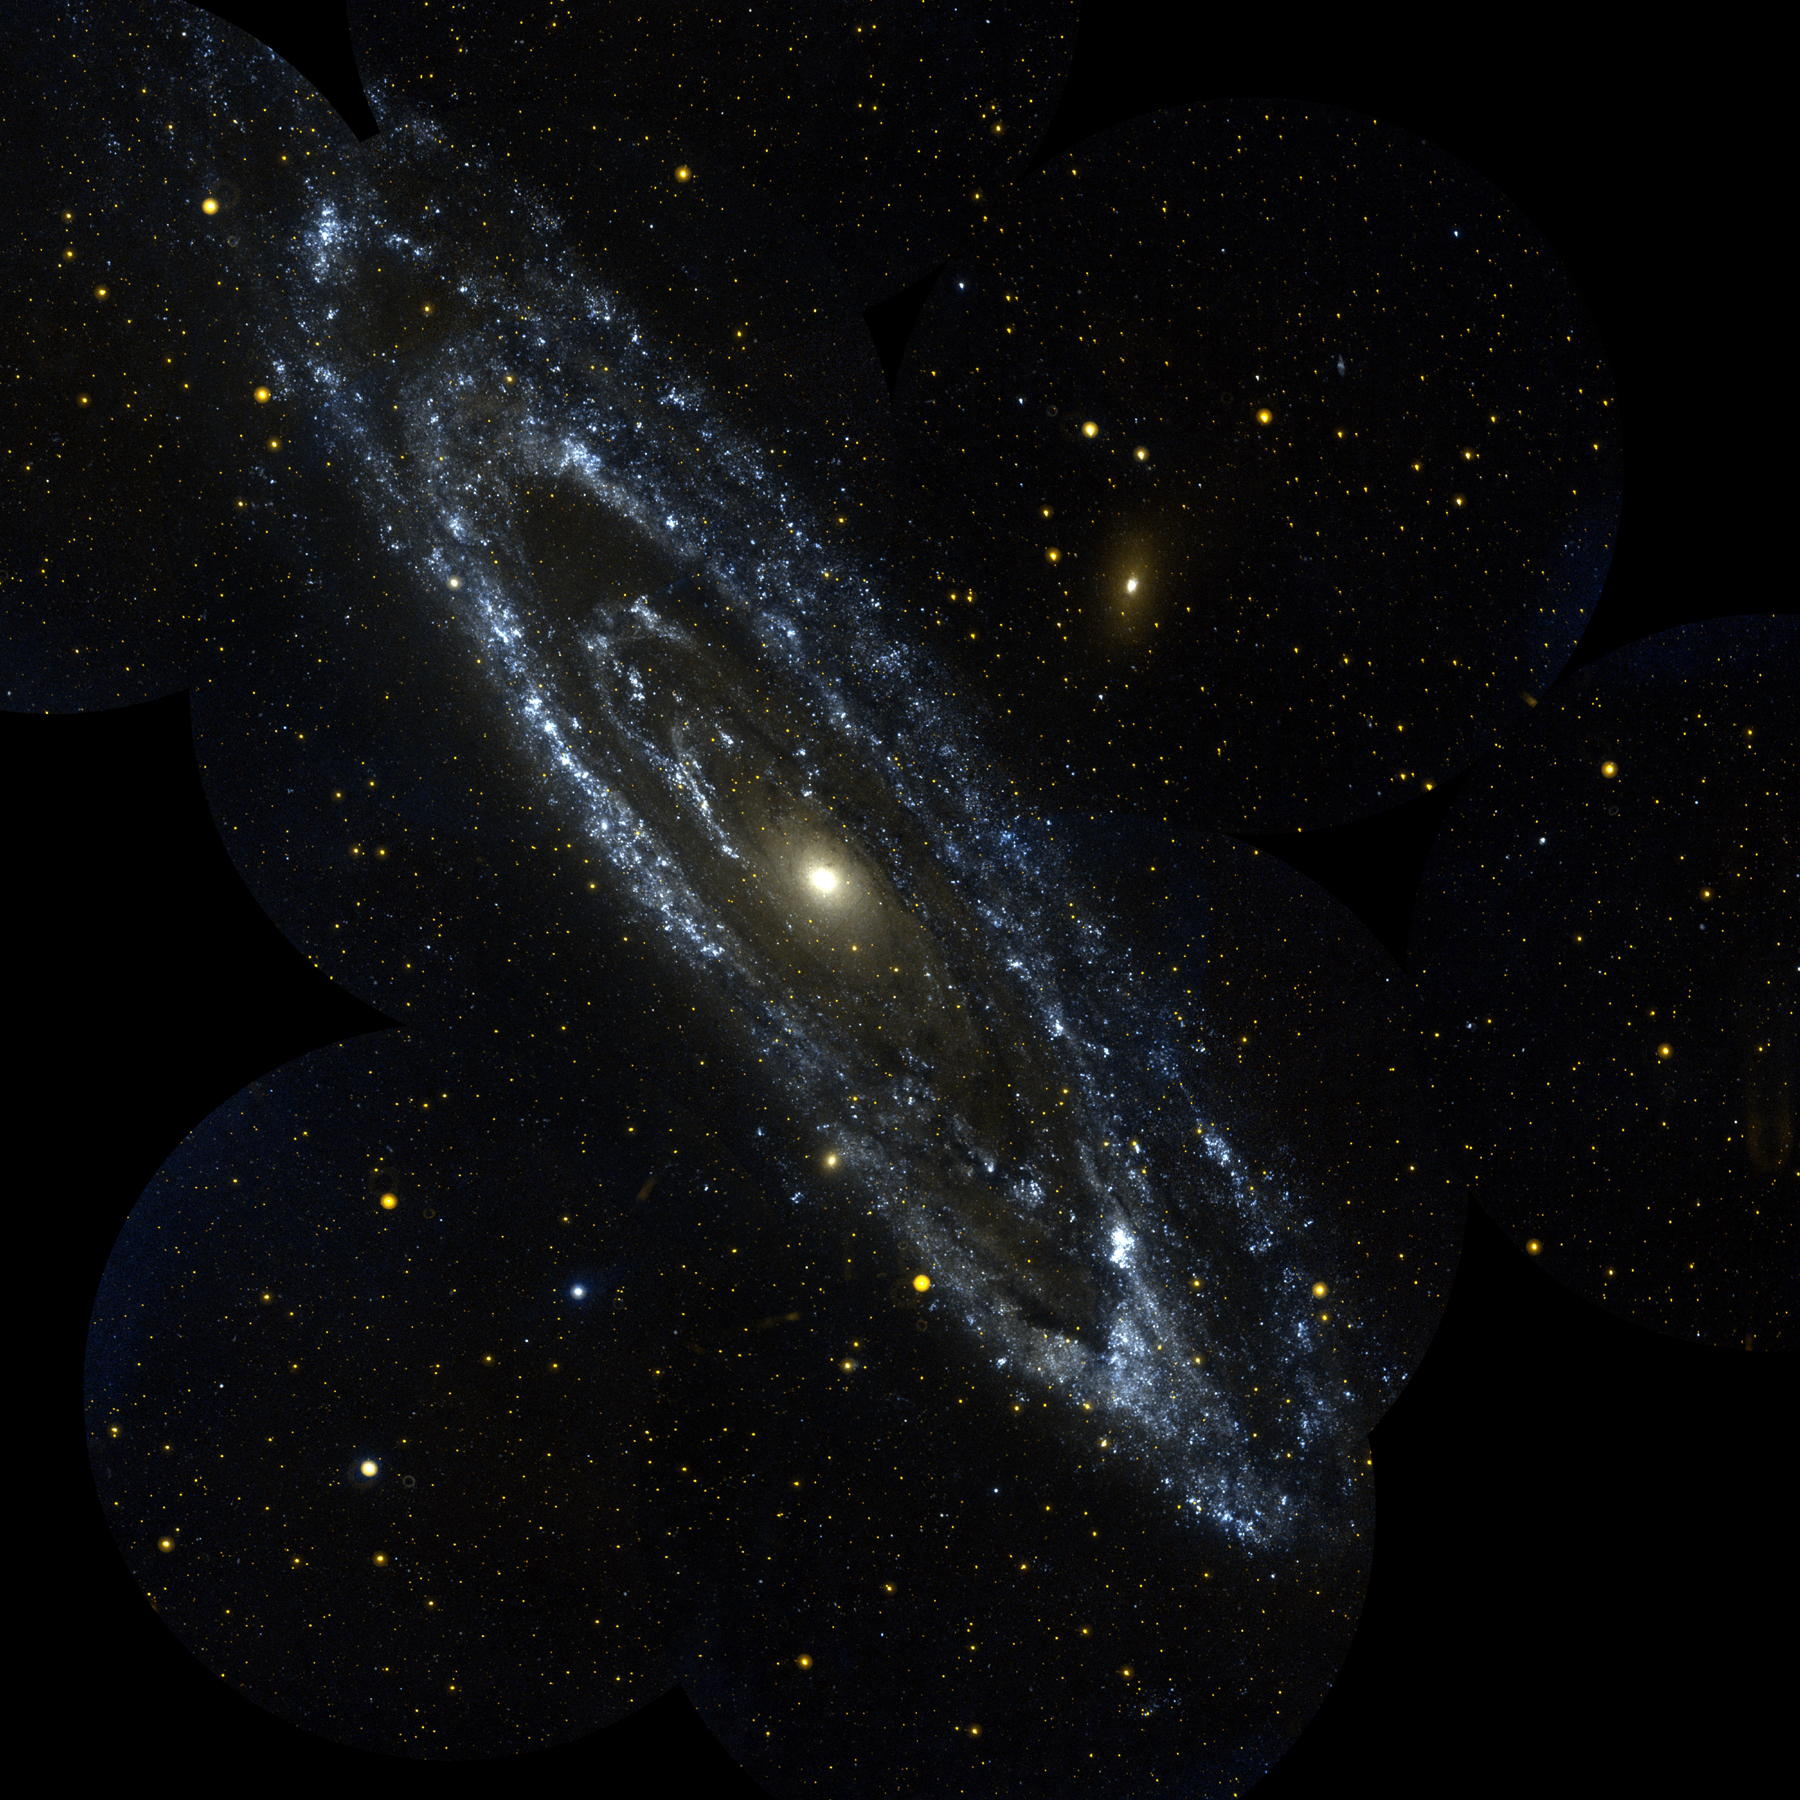 The GALEX telescope took this UV image of the Andromeda galaxy (M31), revealing a surprising shape not apparent in visible light.